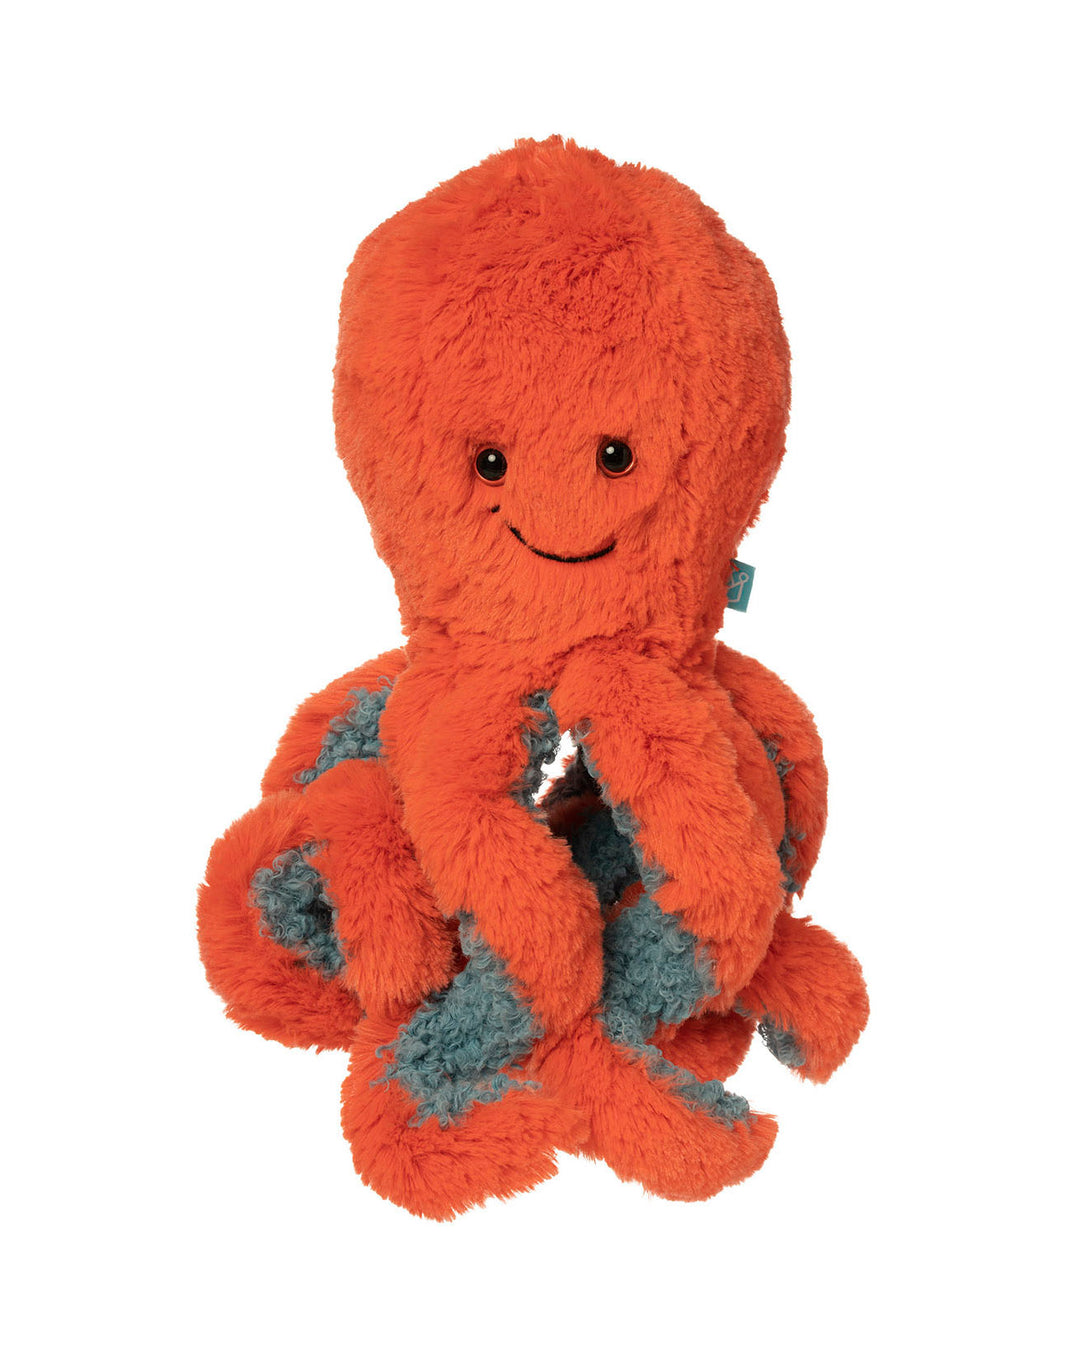 Octopus Coral plush toy on white background